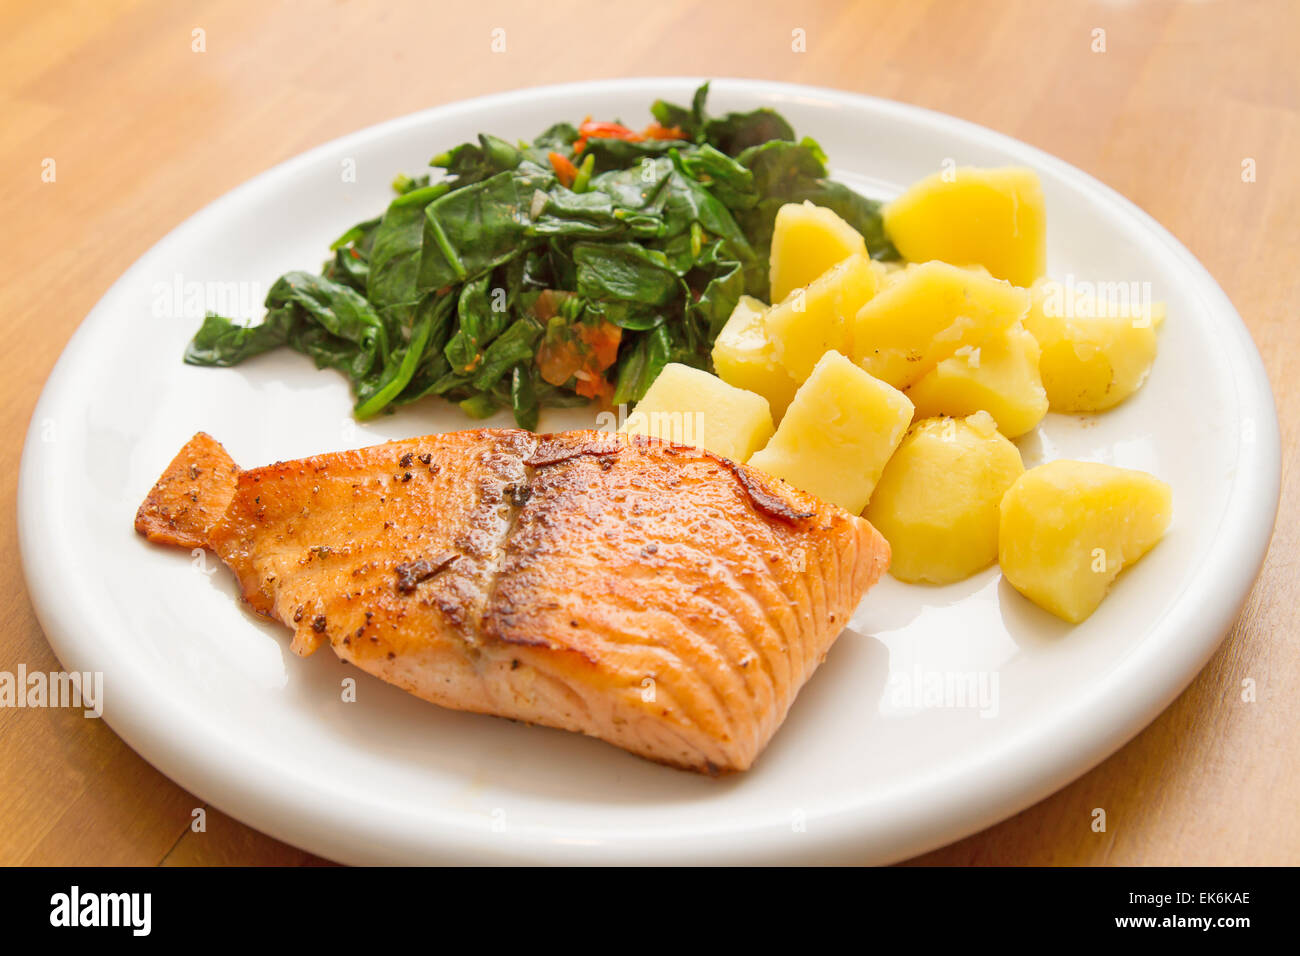 Salmon fillet with spinach Stock Photo